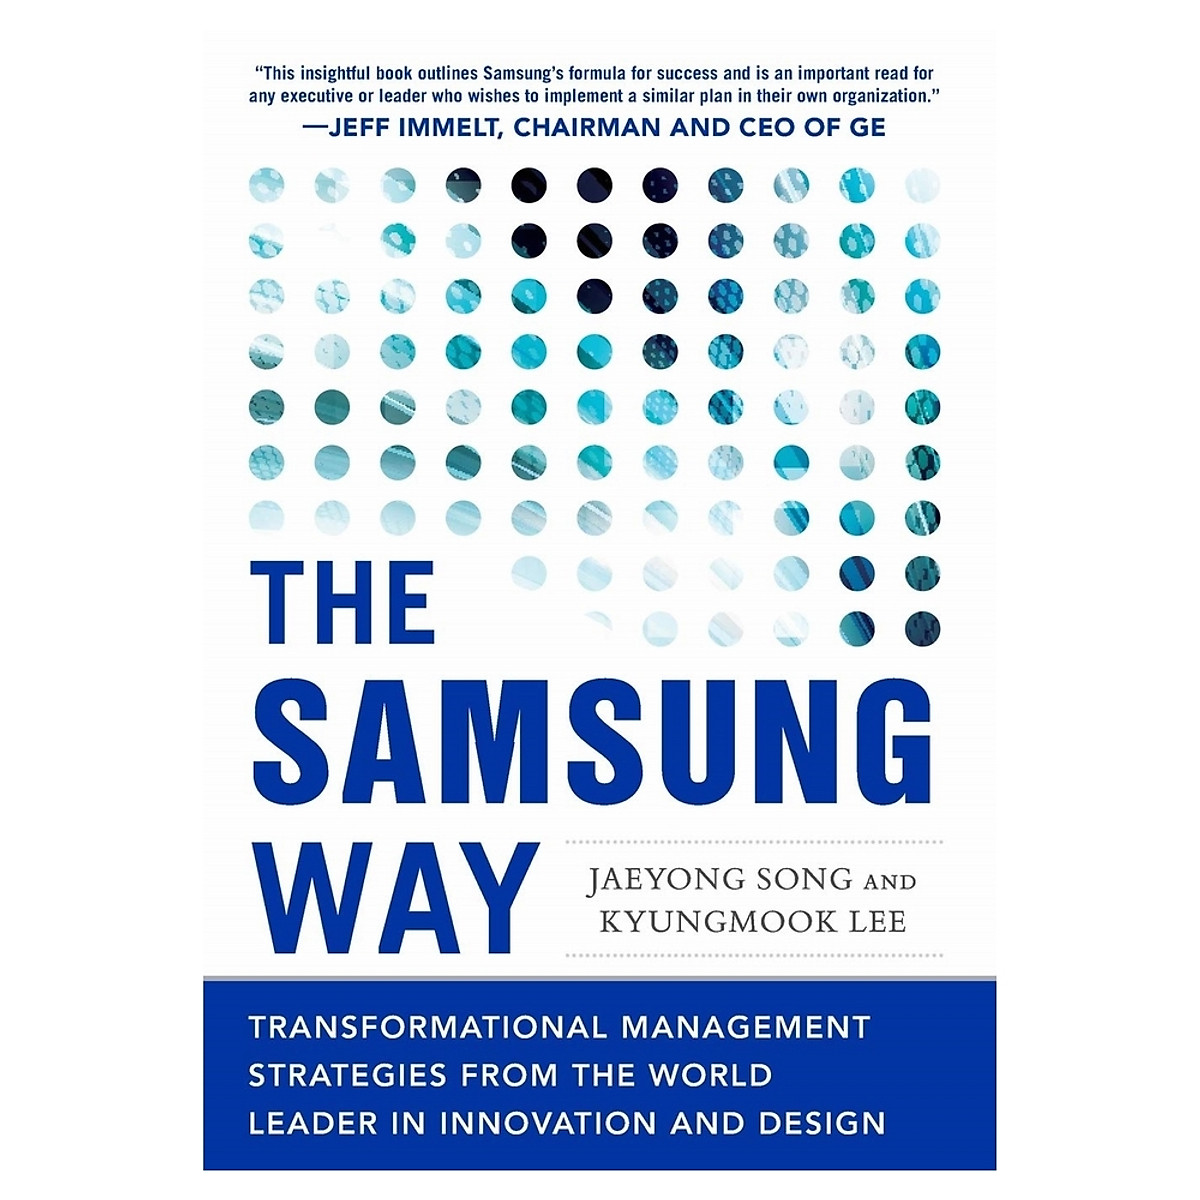 Samsung Way: Transformational Management Strategies from the World Leader in Innovation and Design